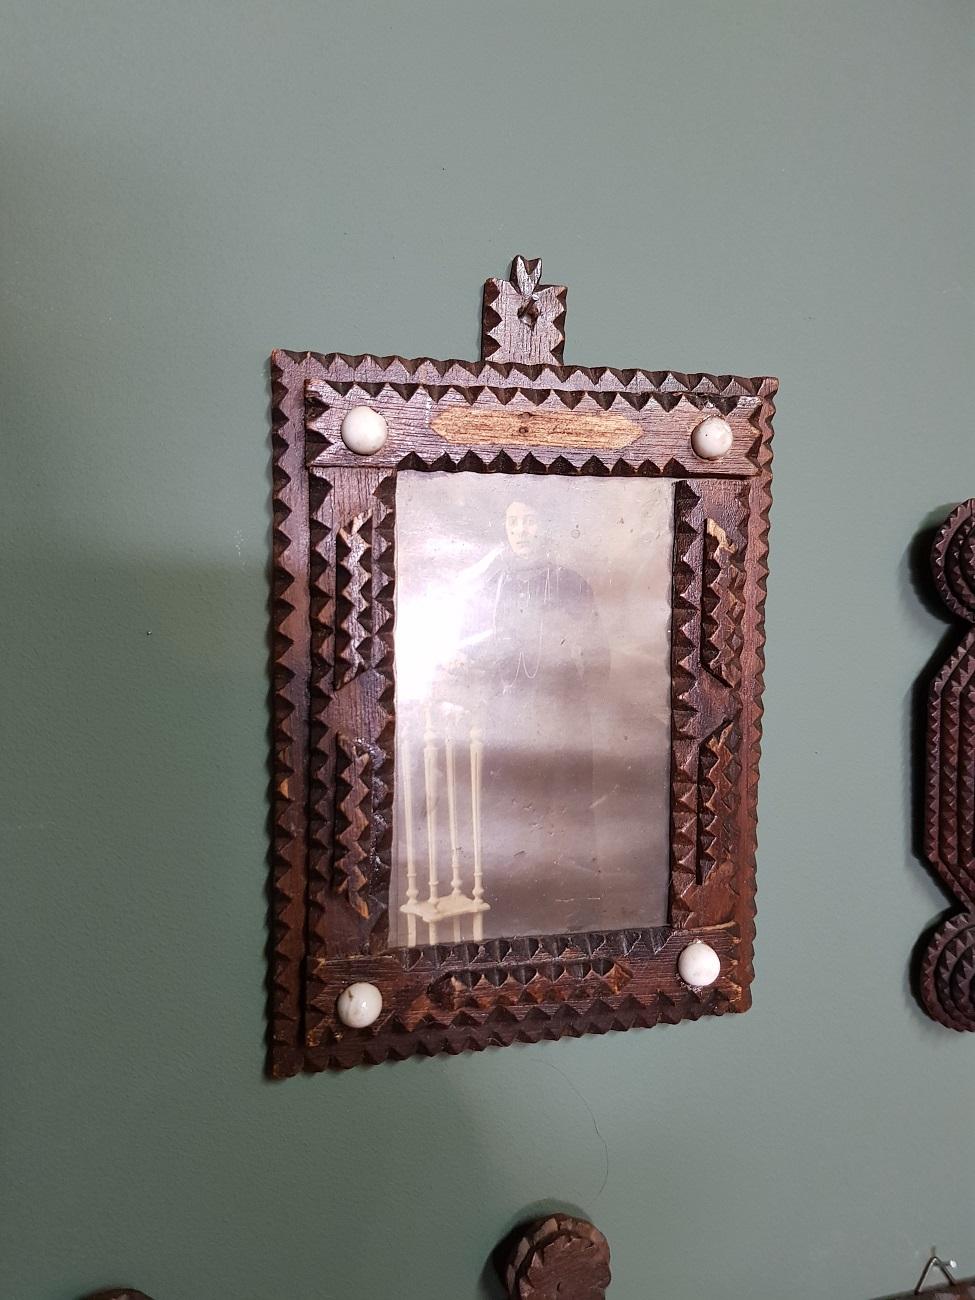 Set of 5 old handmade Tramp Art photo frames some of which have white glass half balls, all are in a reasonable condition with wear consistent by age and use. These are from circa 1900.

The measurements are around this and smaller,
Depth 4 cm/